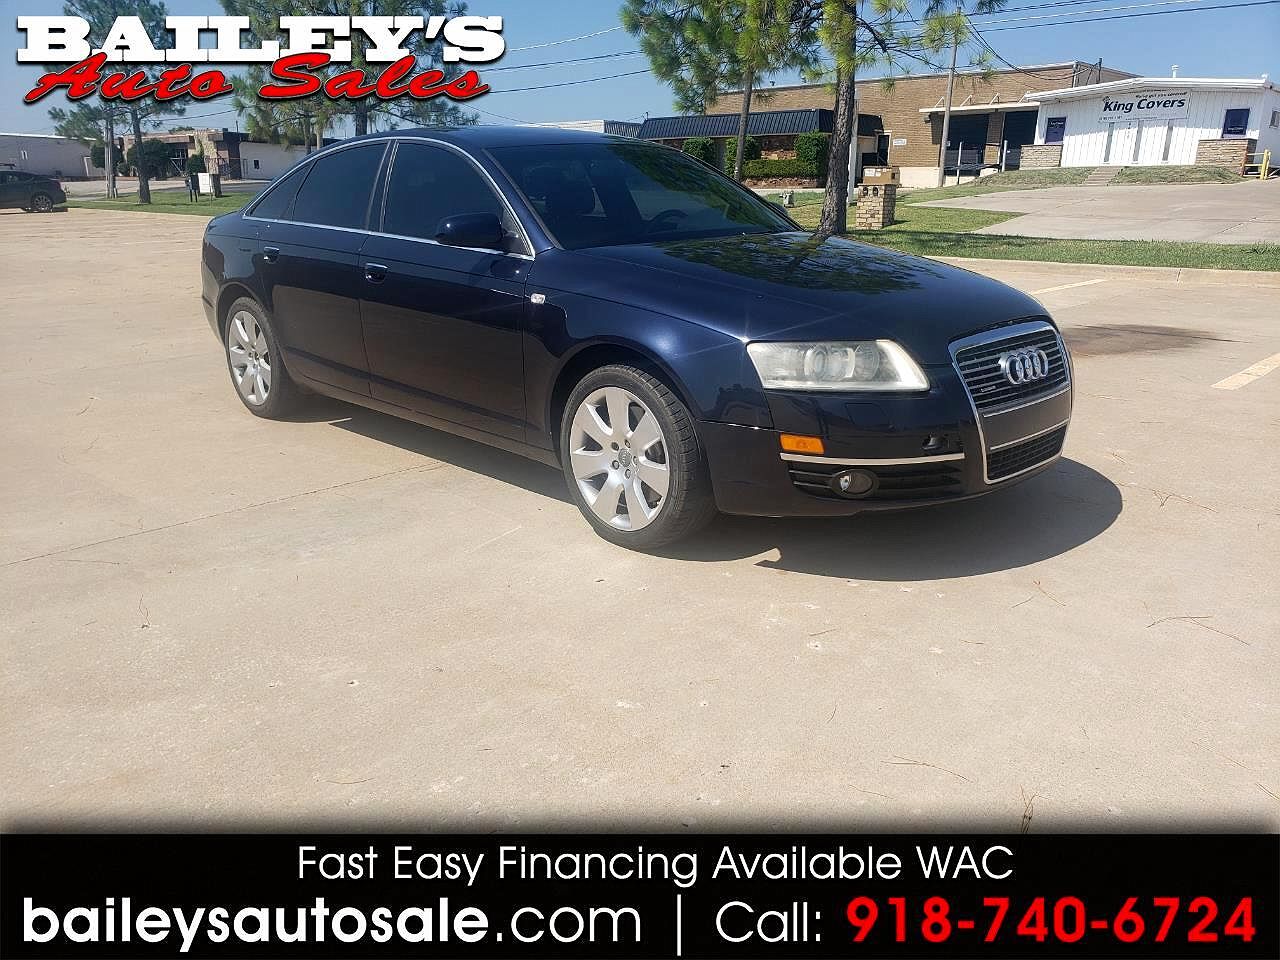 2007 Audi A6 null image 0